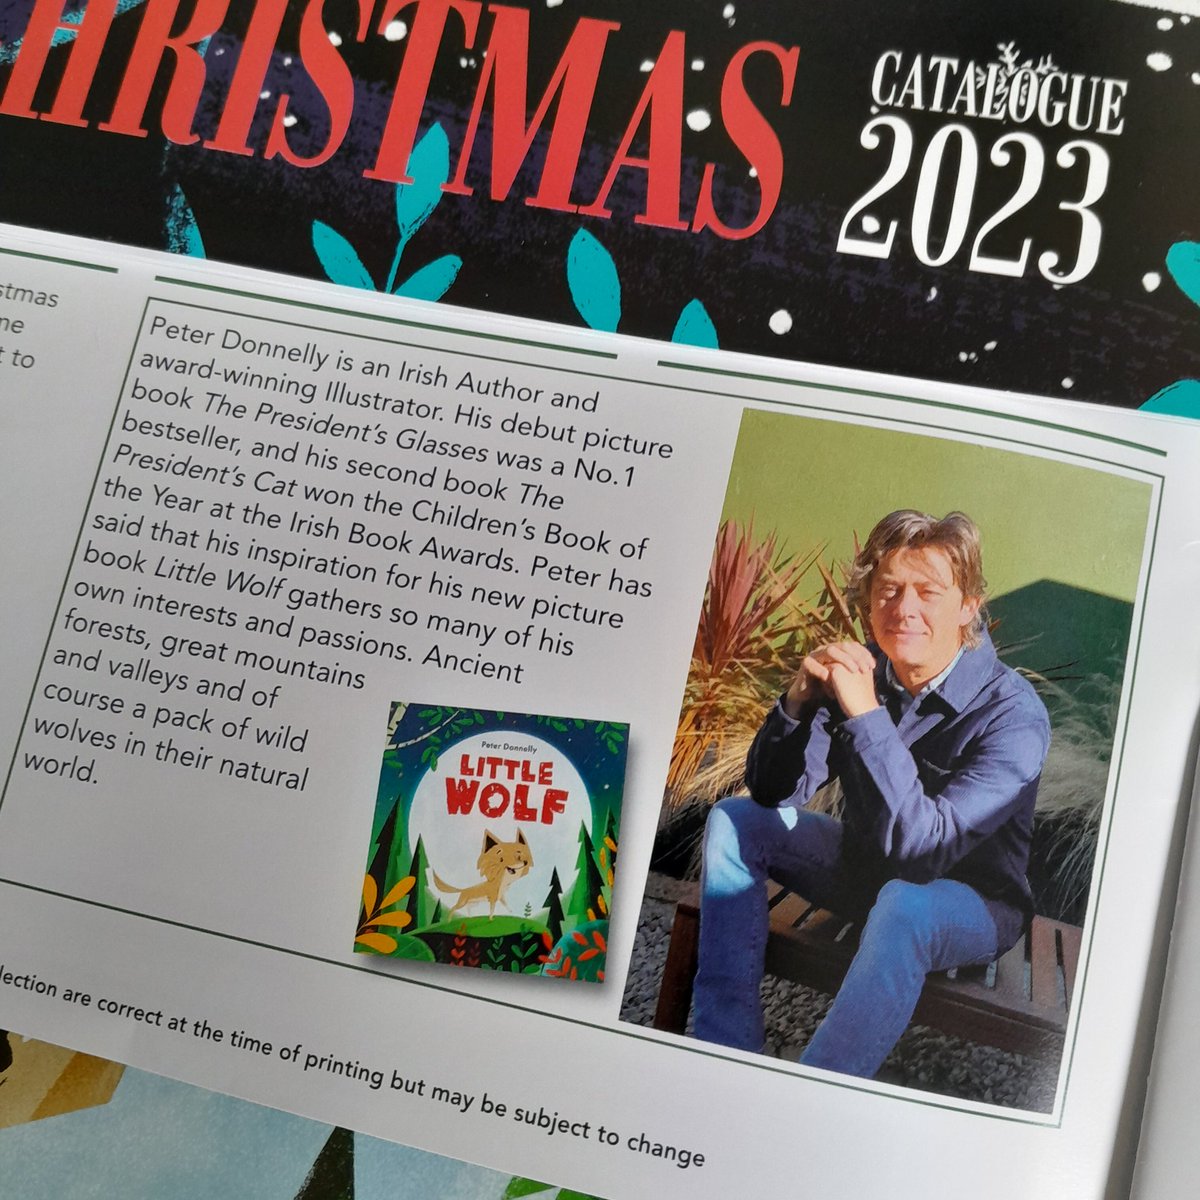 The new @ArgosyBooks catalogue is available in shops now and features a festive cover from Little Wolf! Great to see both #littlewolfpicturebook and #thepresidentsdogpicturebook recommended in the childrens section 🙏
@HachetteKids @Gill_Books @emmalayfield2